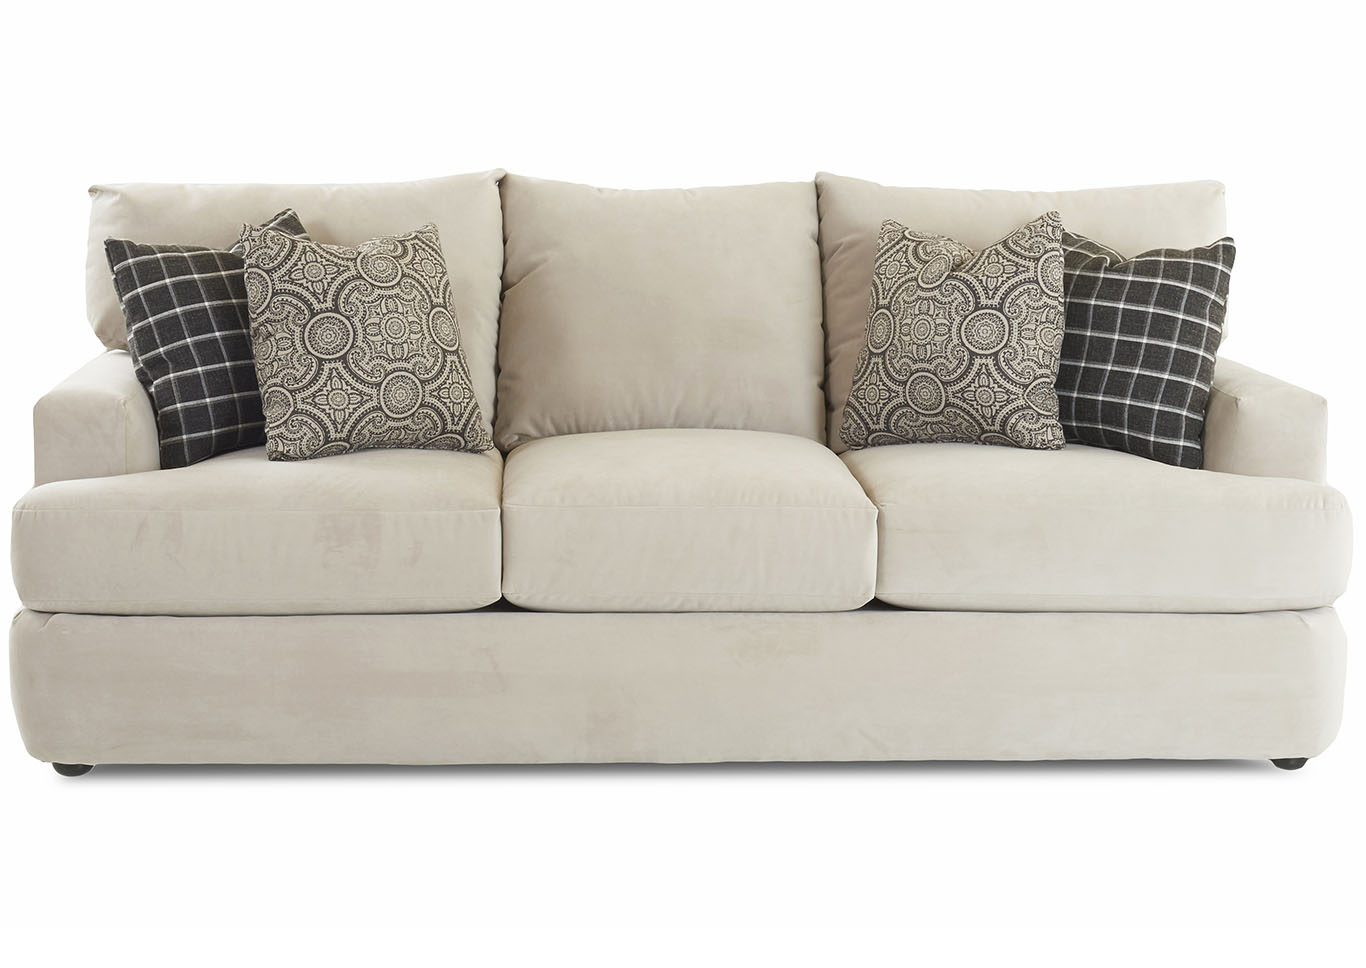 Oliver Tina Oyster Gray Stationary Fabric Sofa,Klaussner Home Furnishings